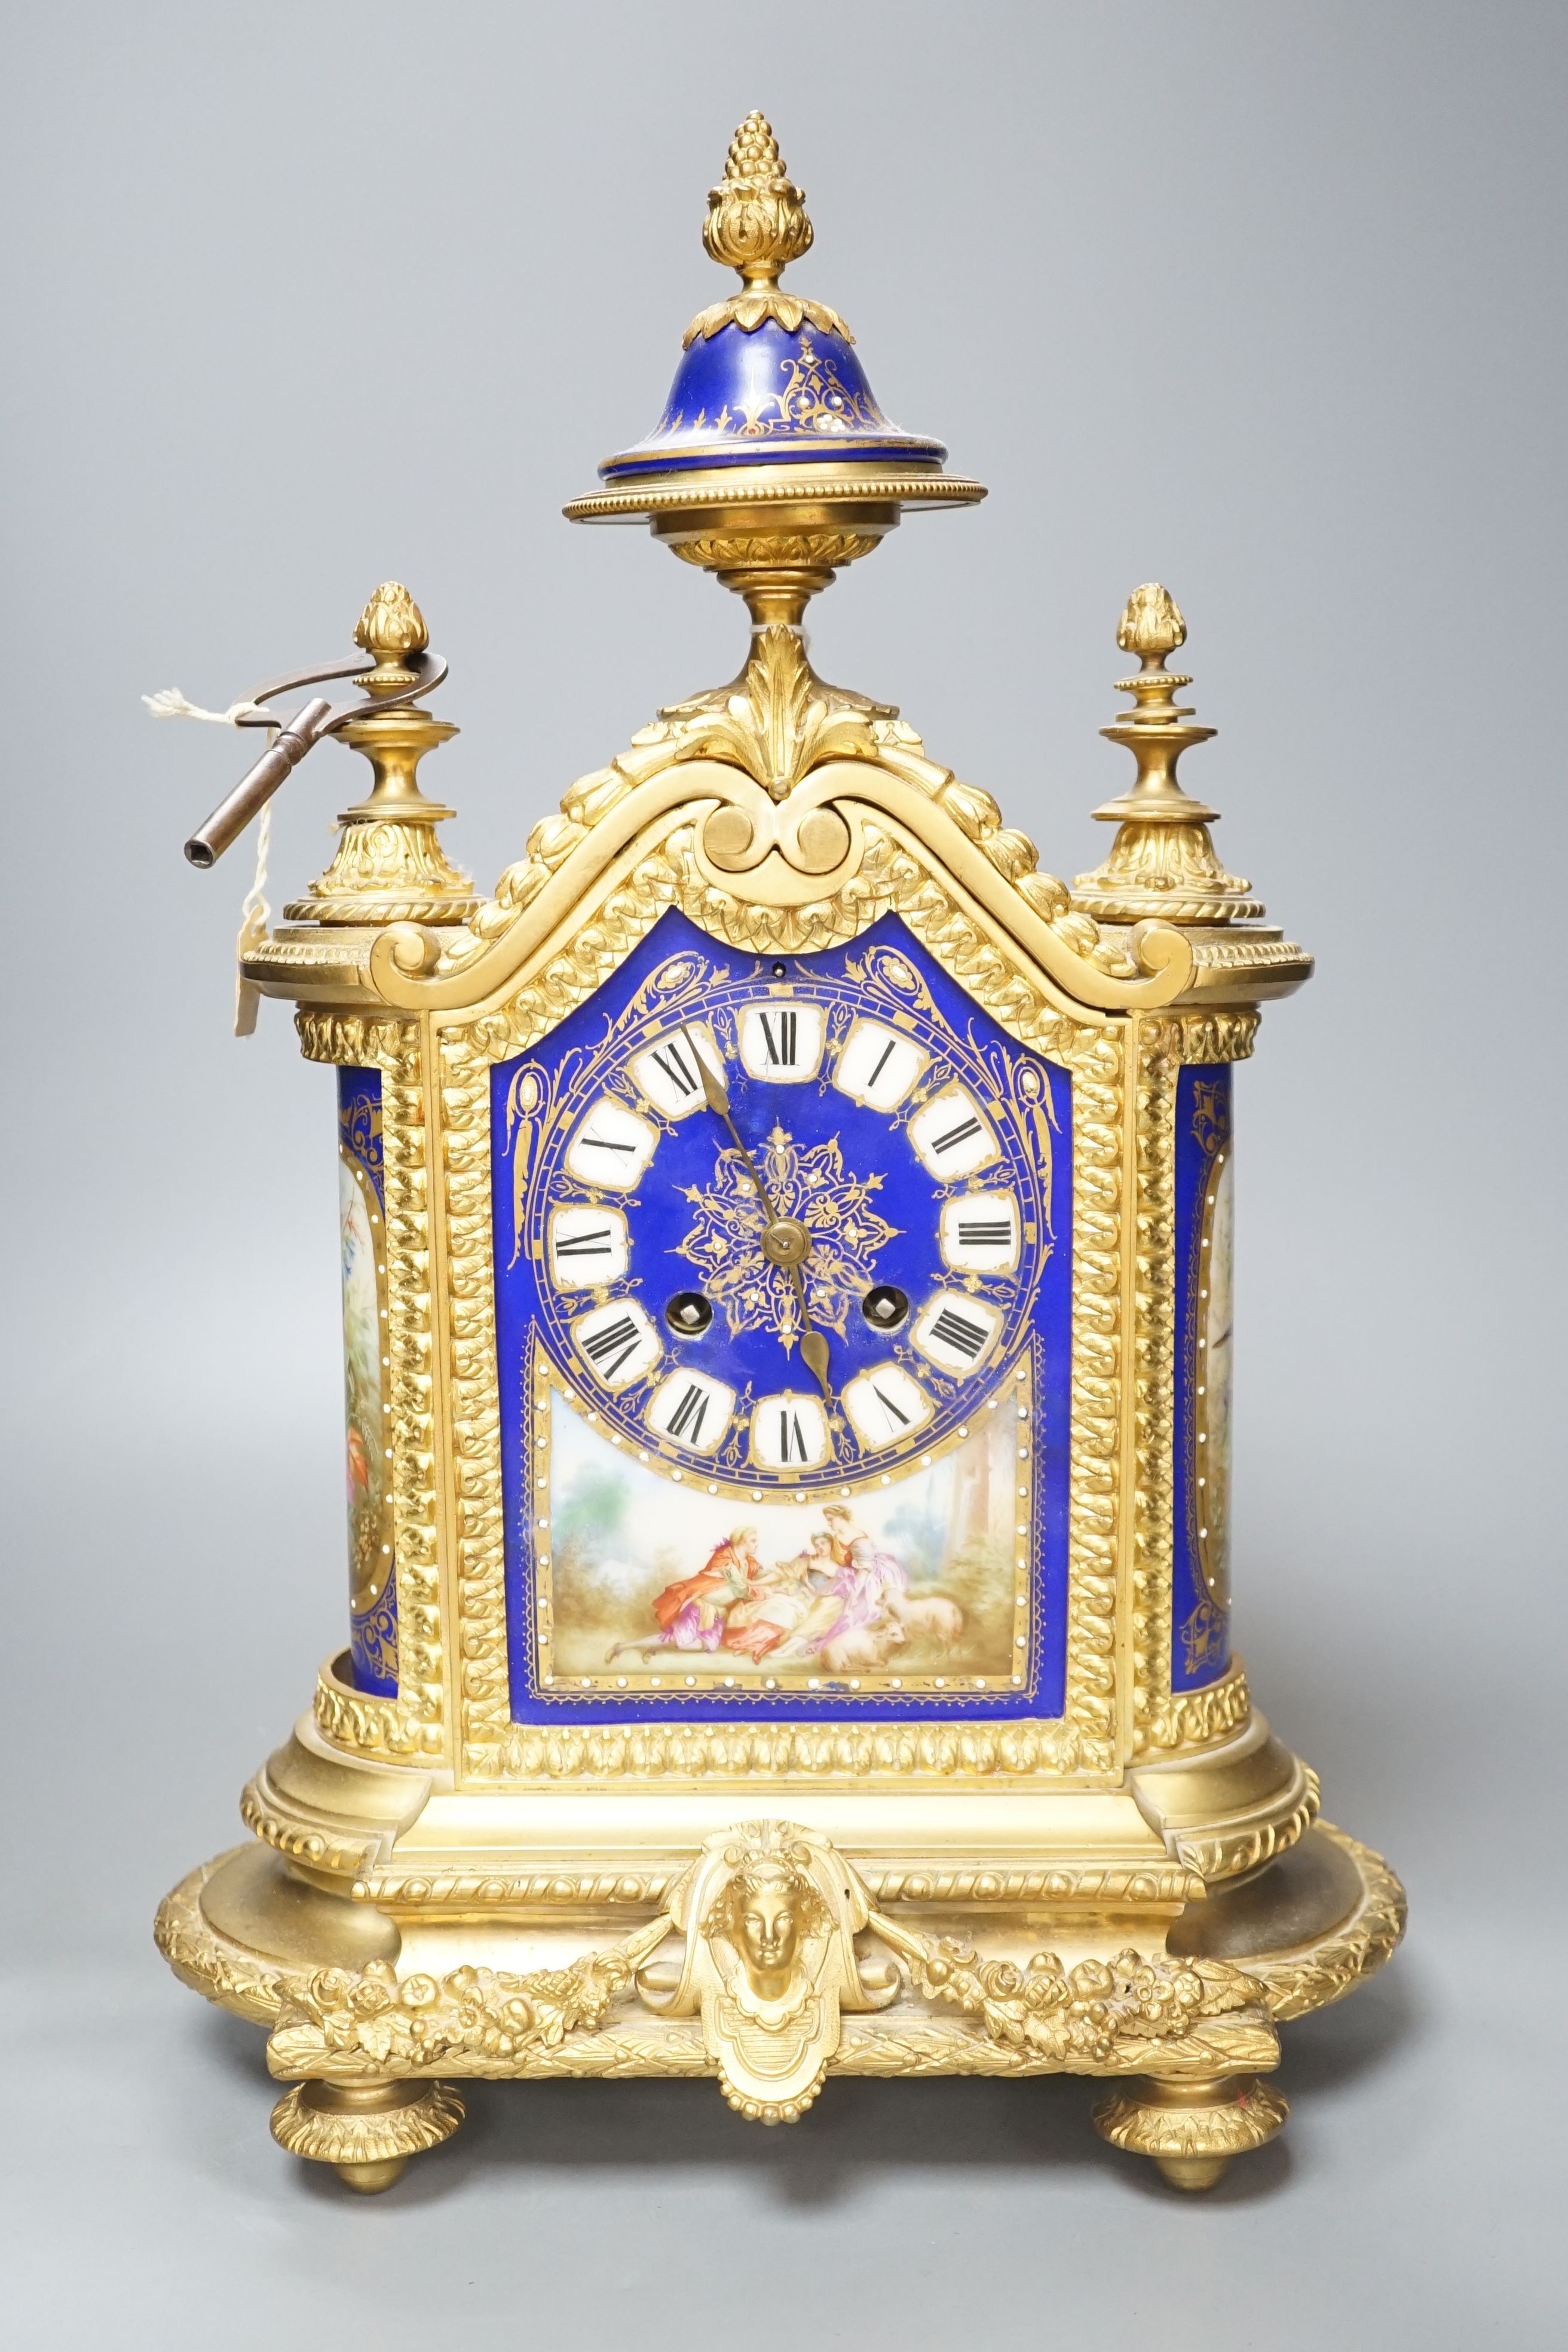 A 19th century French ormolu cased mantel clock, with decorated porcelain panels and face, eight day movement with strike, 40cm high